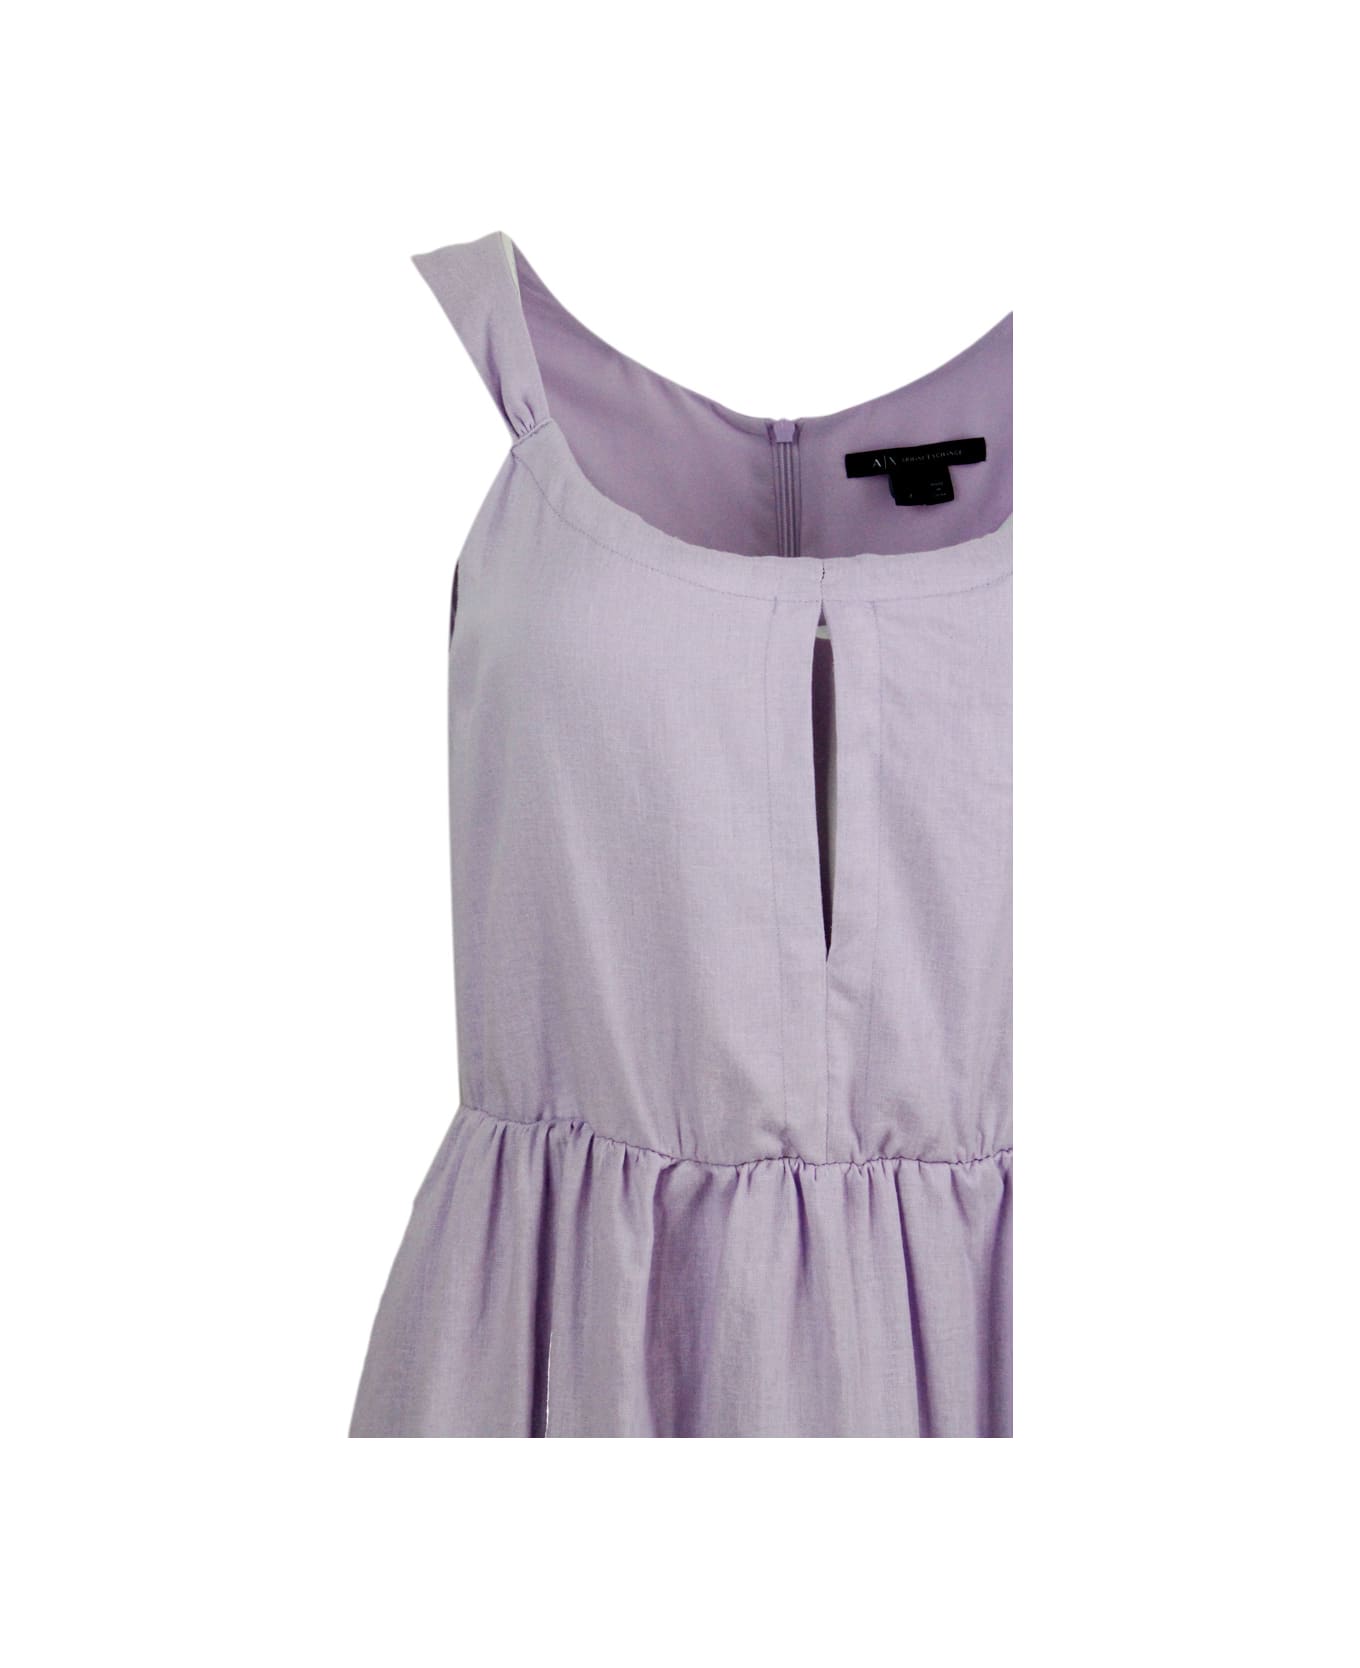 Armani Collezioni Sleeveless Dress Made Of Linen Blend With Elastic Gathering At The Waist. Welt Pockets - Pink